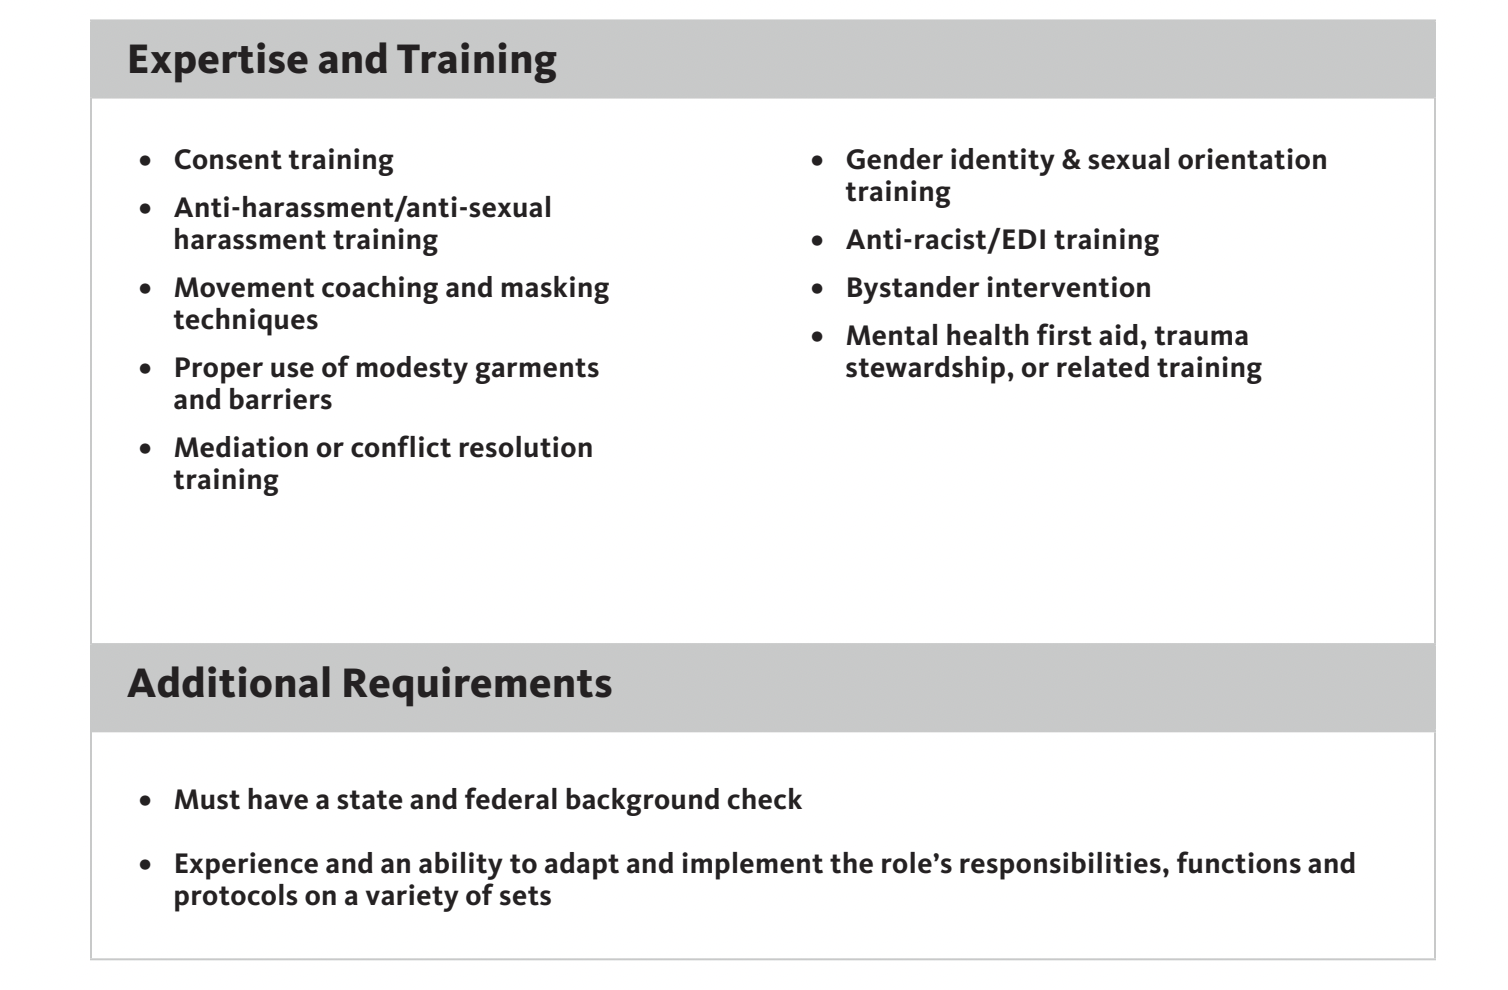 A slide titled 'Expertise and Training' and 'Additional Requirements' with accompanying bullet points